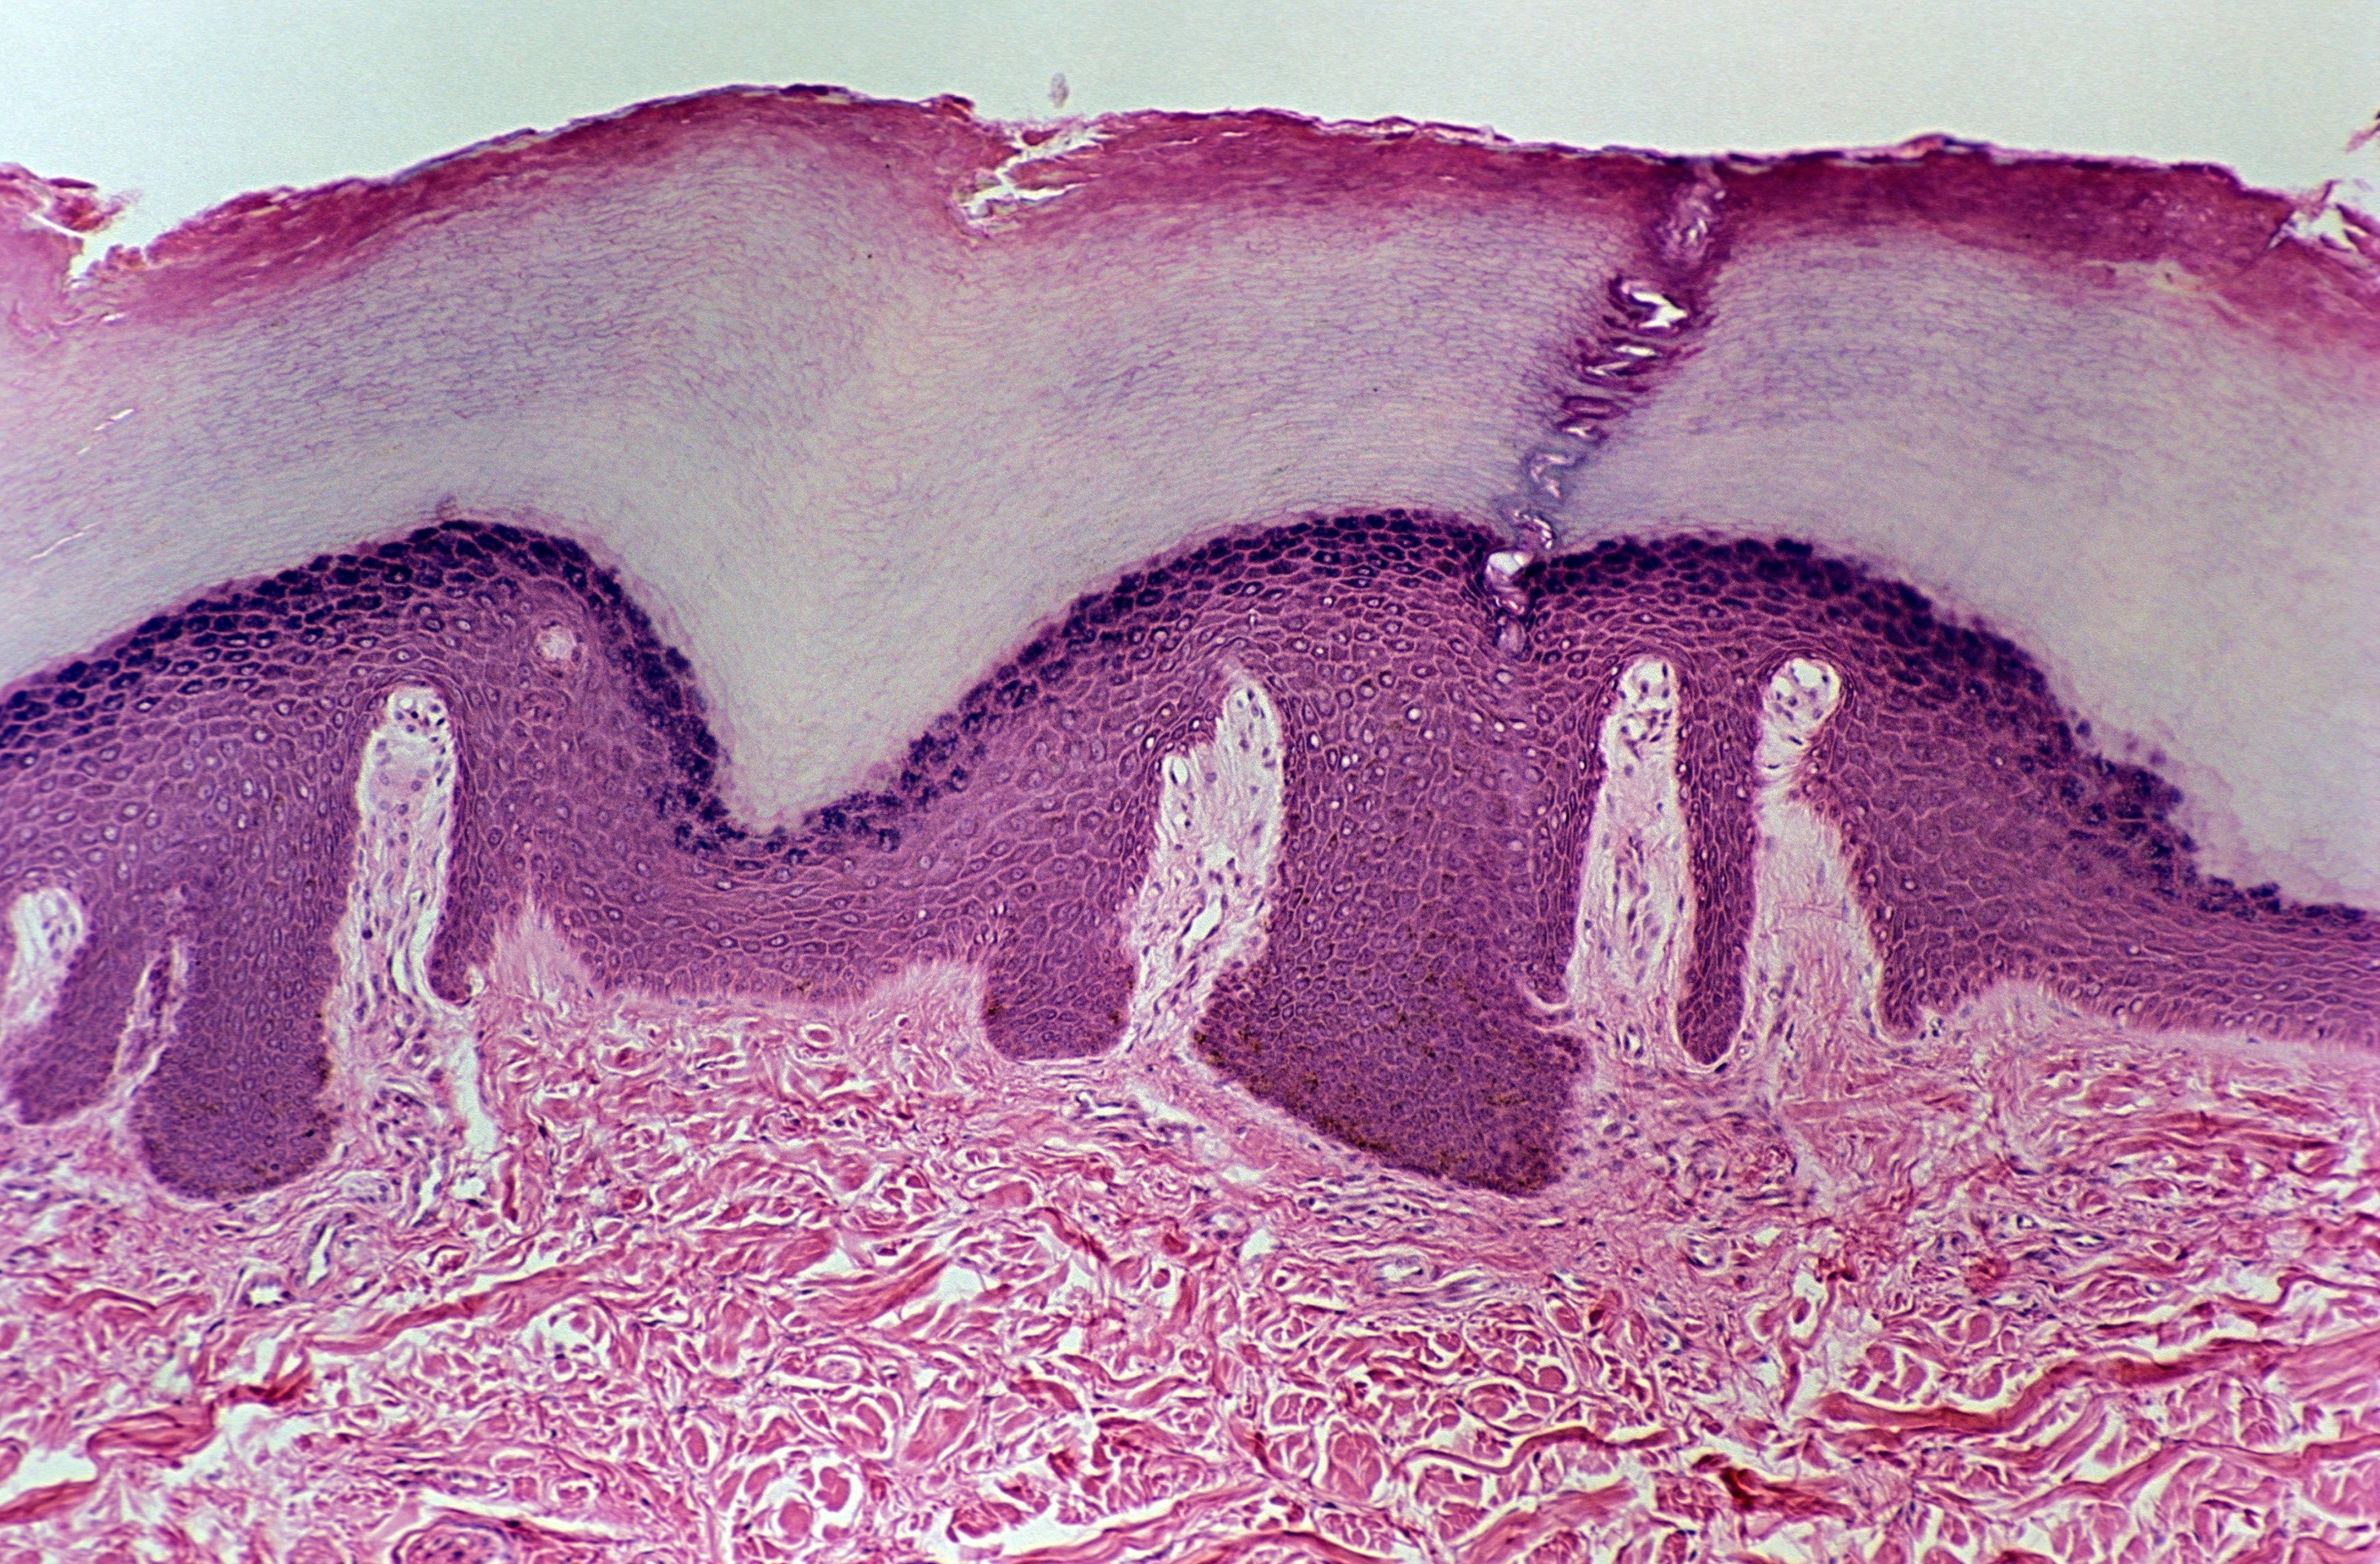 Microscopic image showing a cross-section of human skin. The outer layer (epidermis) is stained a dark pink-purple and appears undulating, with projections into the lighter pink dermis below, which is composed of a fibrous matrix.